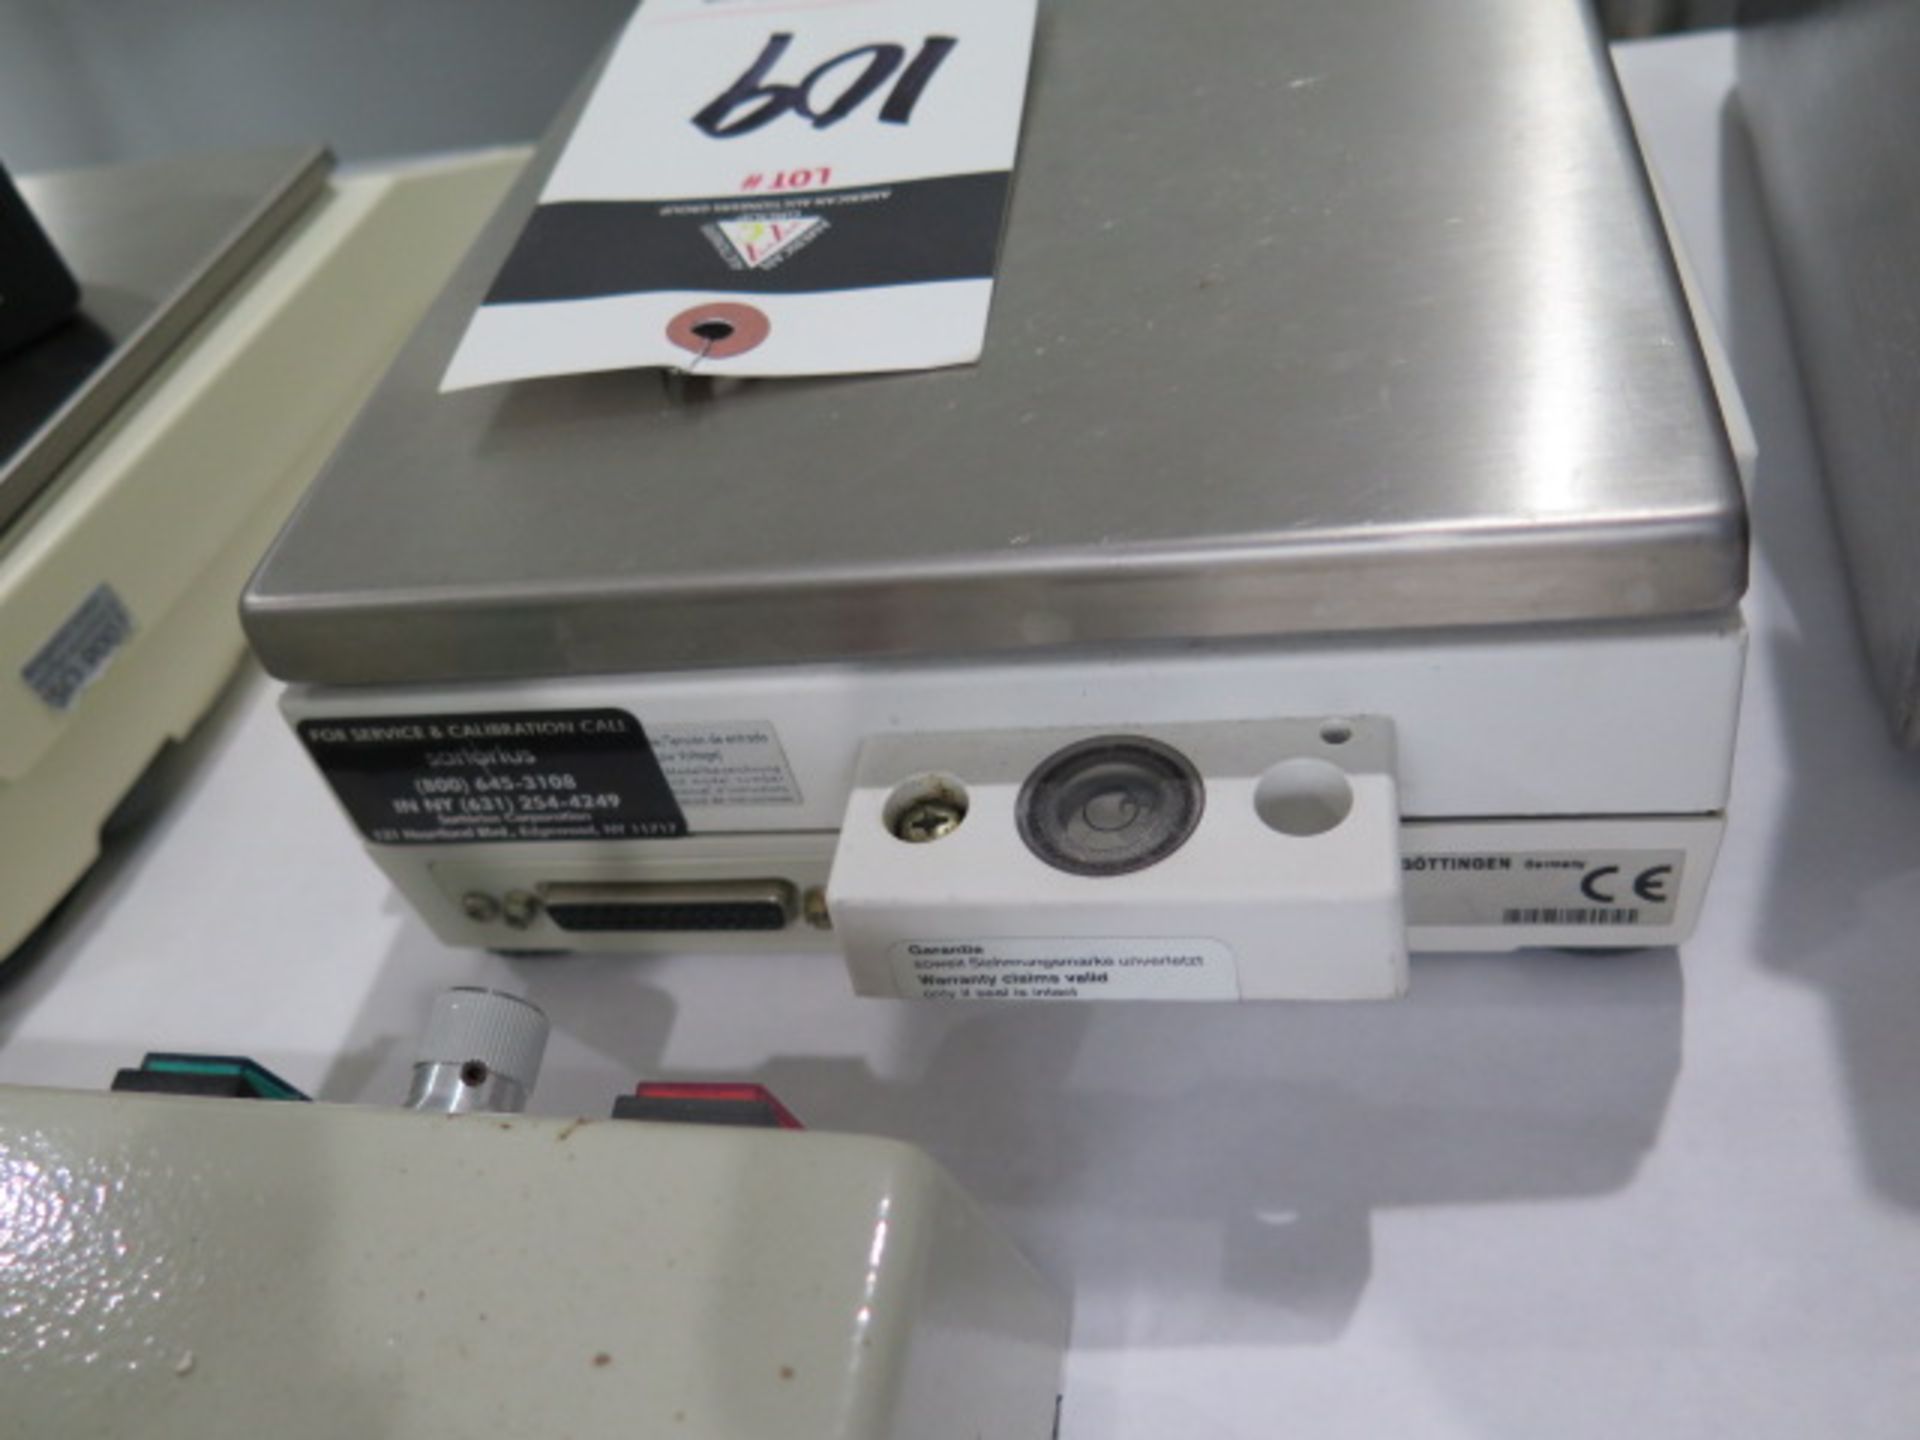 Sartorius BP3100S 3000g Digital Counting Scale (SOLD AS-IS - NO WARRANTY) - Image 4 of 4